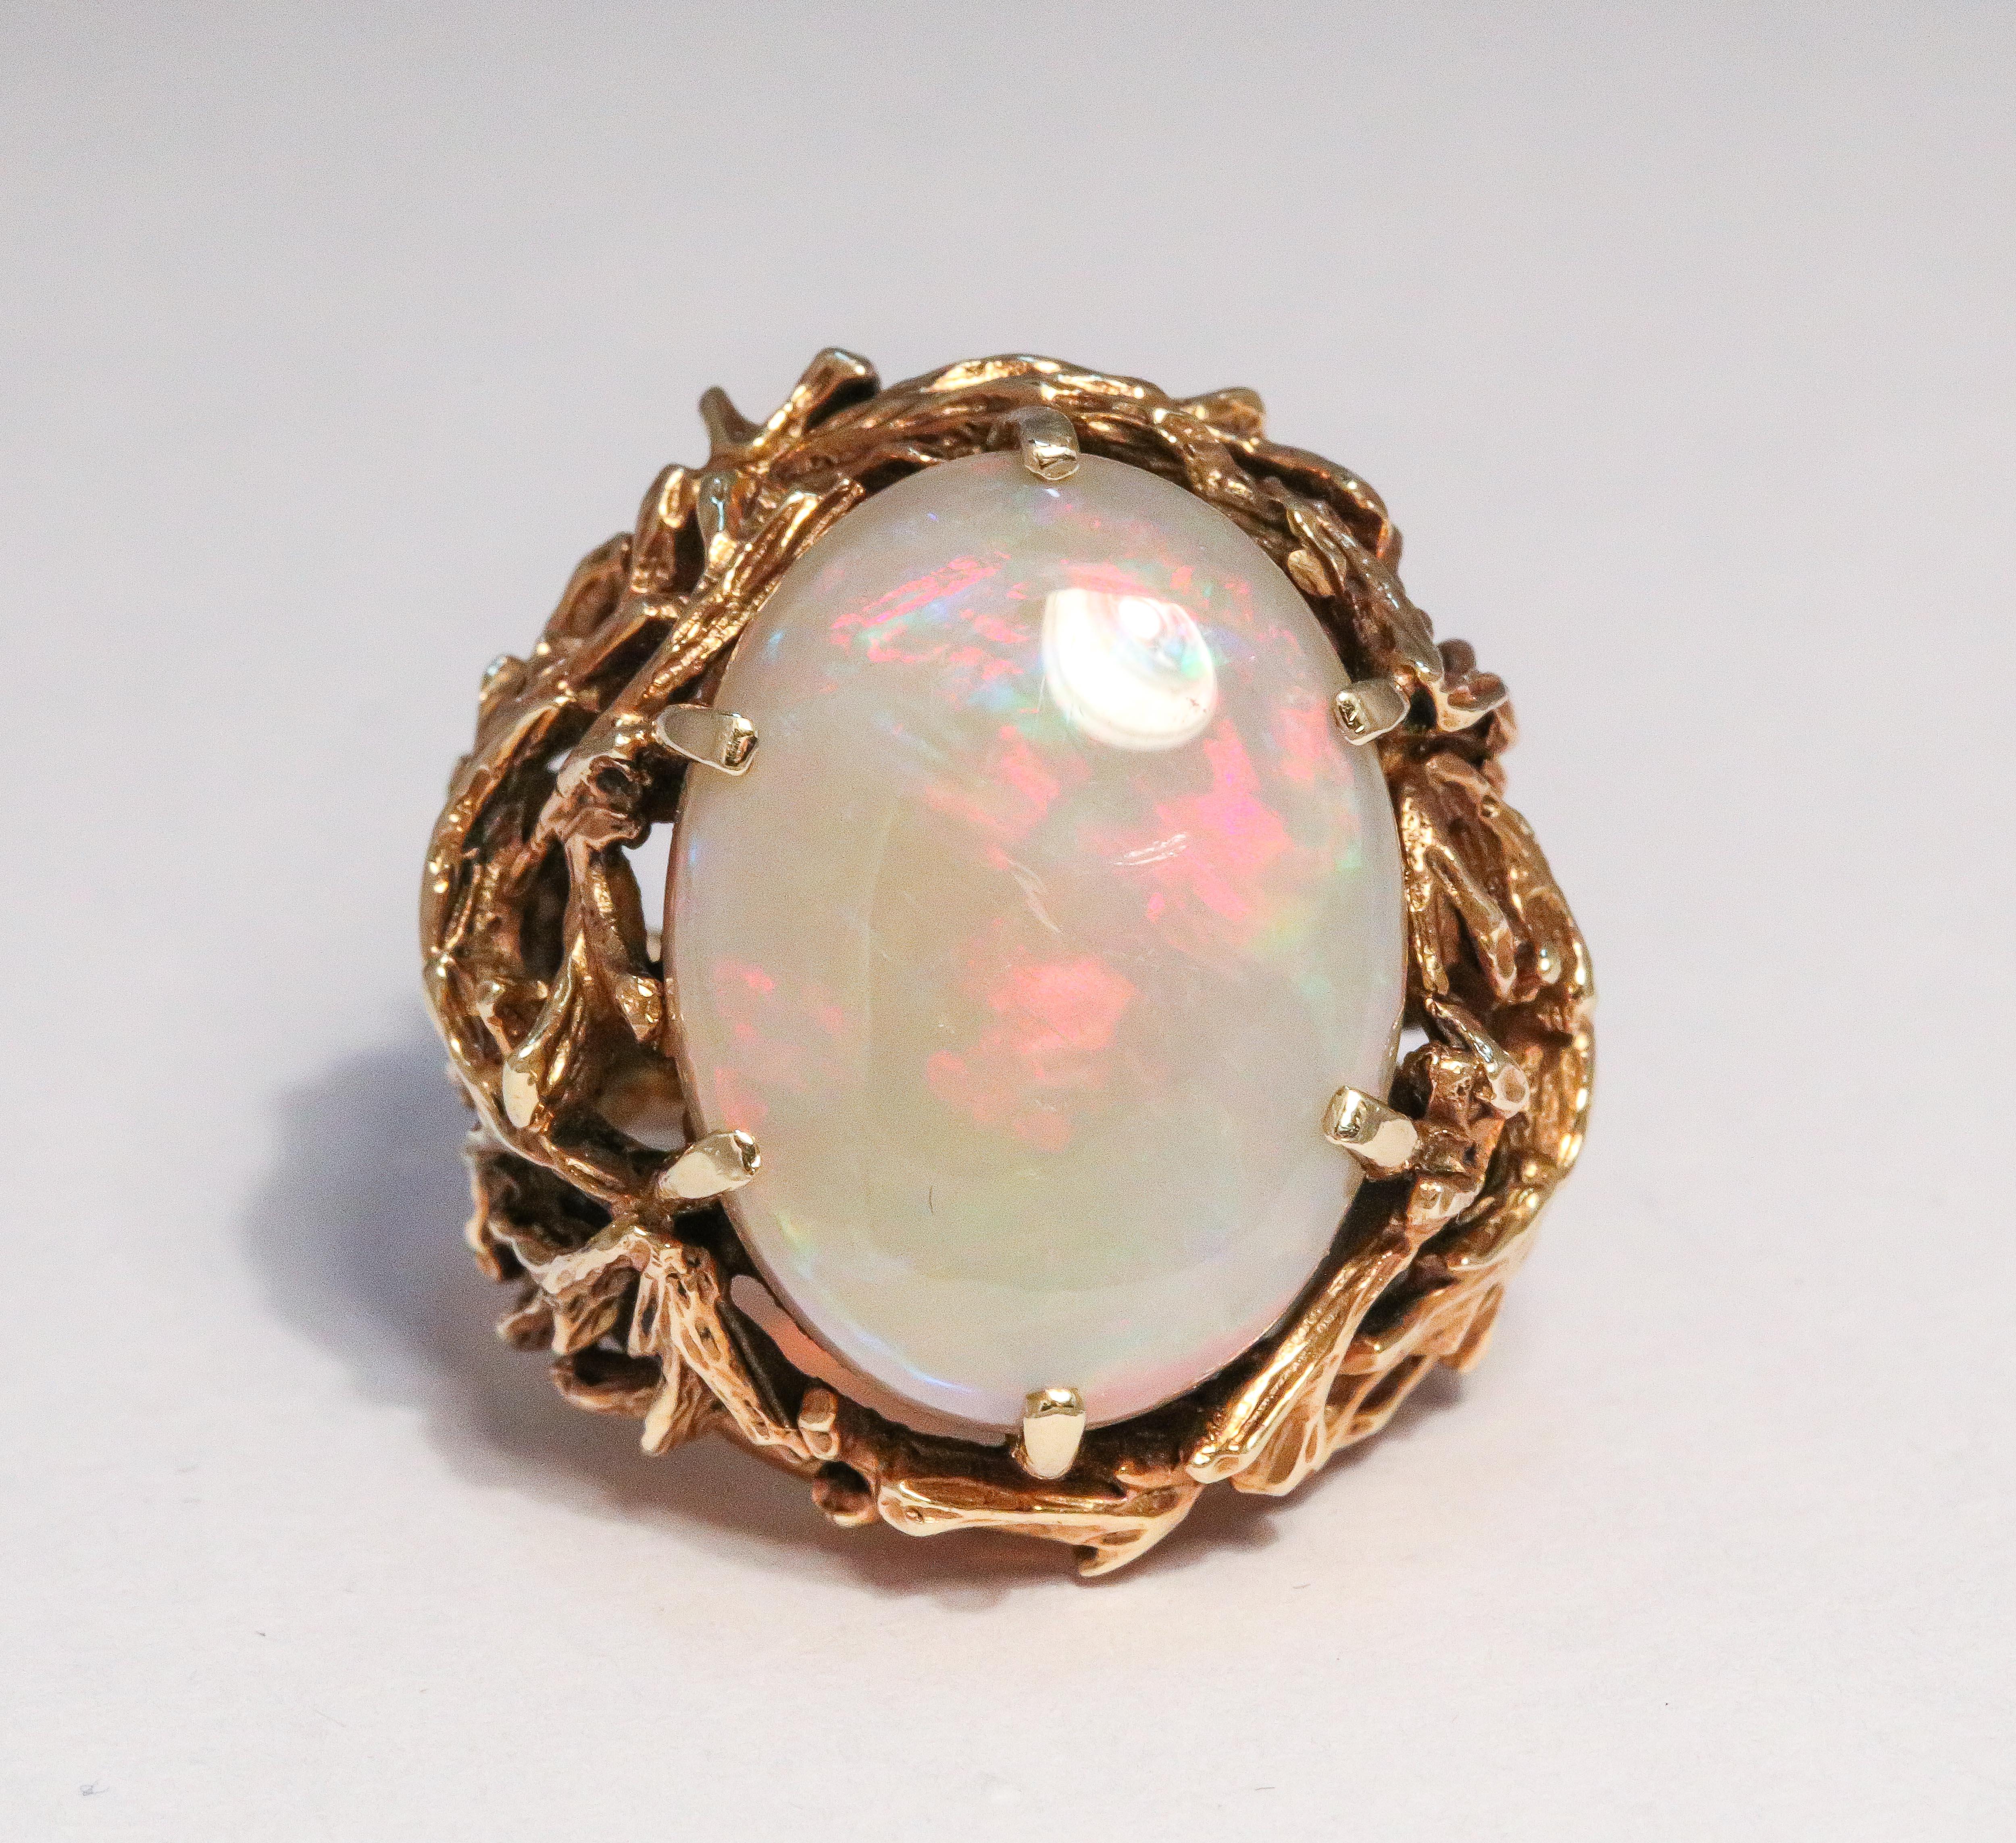 Large Ladies Cocktail white opal gold ring, with gold foliate work

total weight is 15 grams
14k Gold
White Opal is 20x15.5x8mm Oval Cabochon with Green Blue & Red Flashes
Approx. 14cts